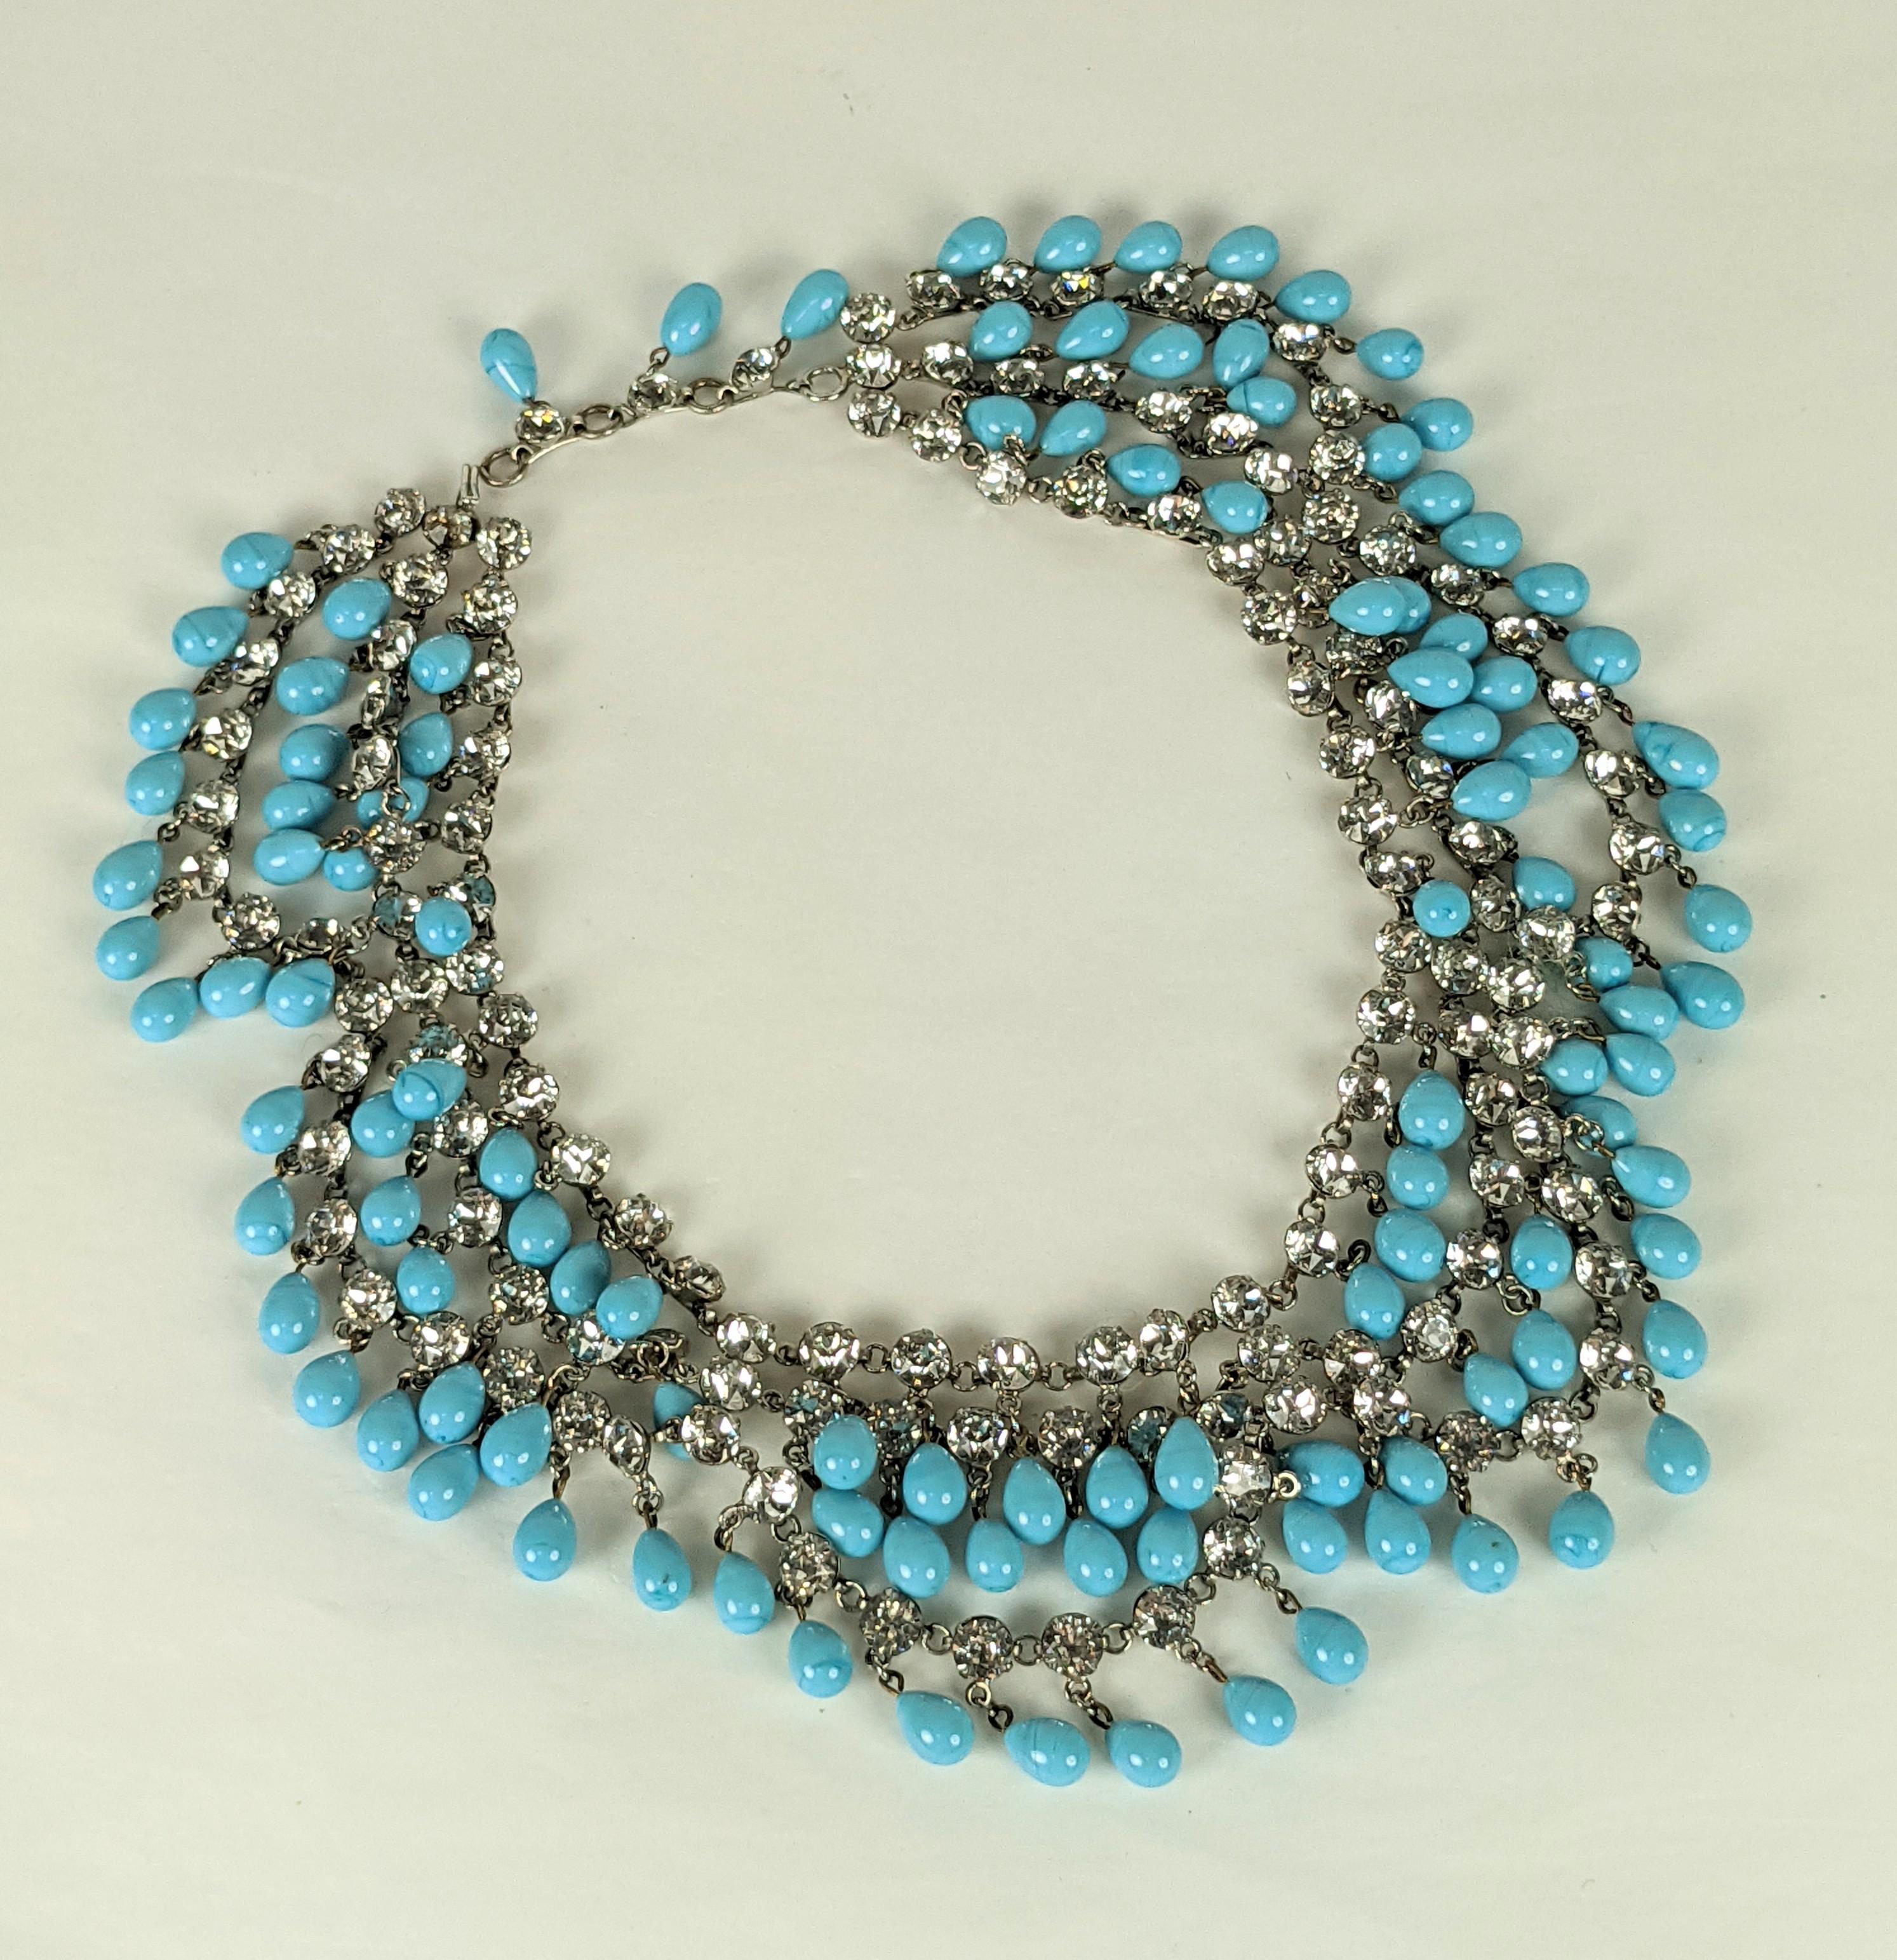 Elegant French Couture Paste and Pate de Verre Draped Collar, handmade with 3 rows of draped paste swags with dozens hand made pate de verre turquoise drops. Incredible quality. 
13.5